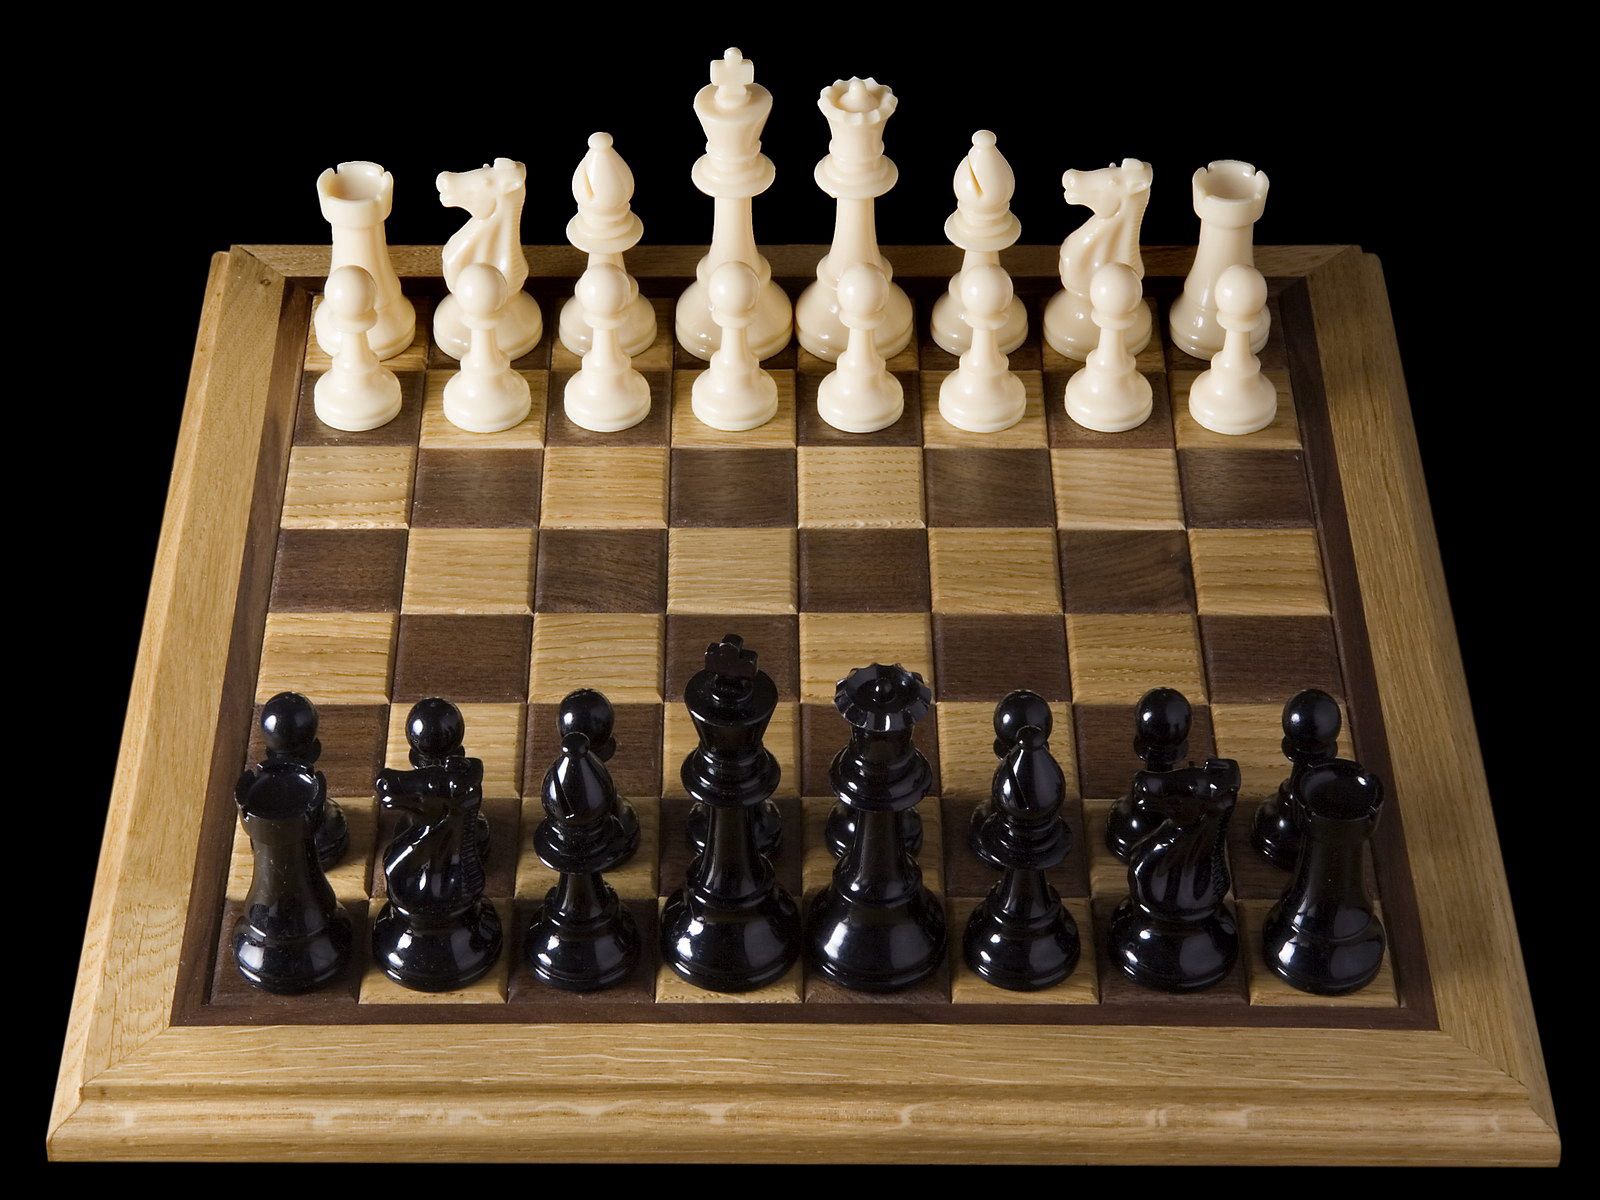 chess, consignment, sports, black, white, shapes, shape, game, board, party 4K